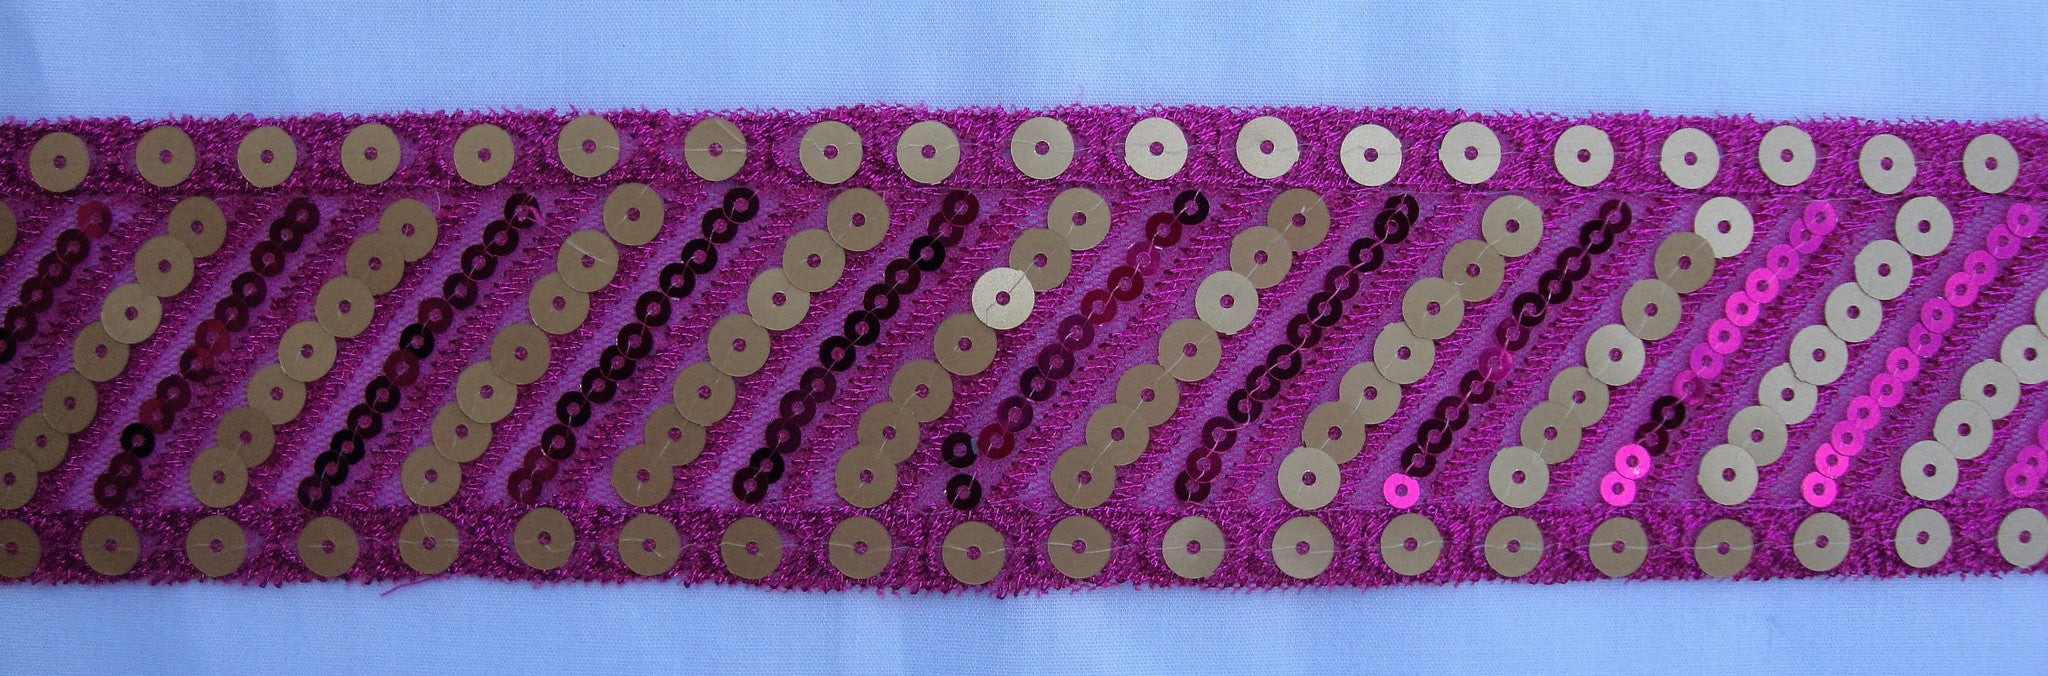 Fuchsia Mesh Trimming with Sequins (Sold as a 3 yard piece)